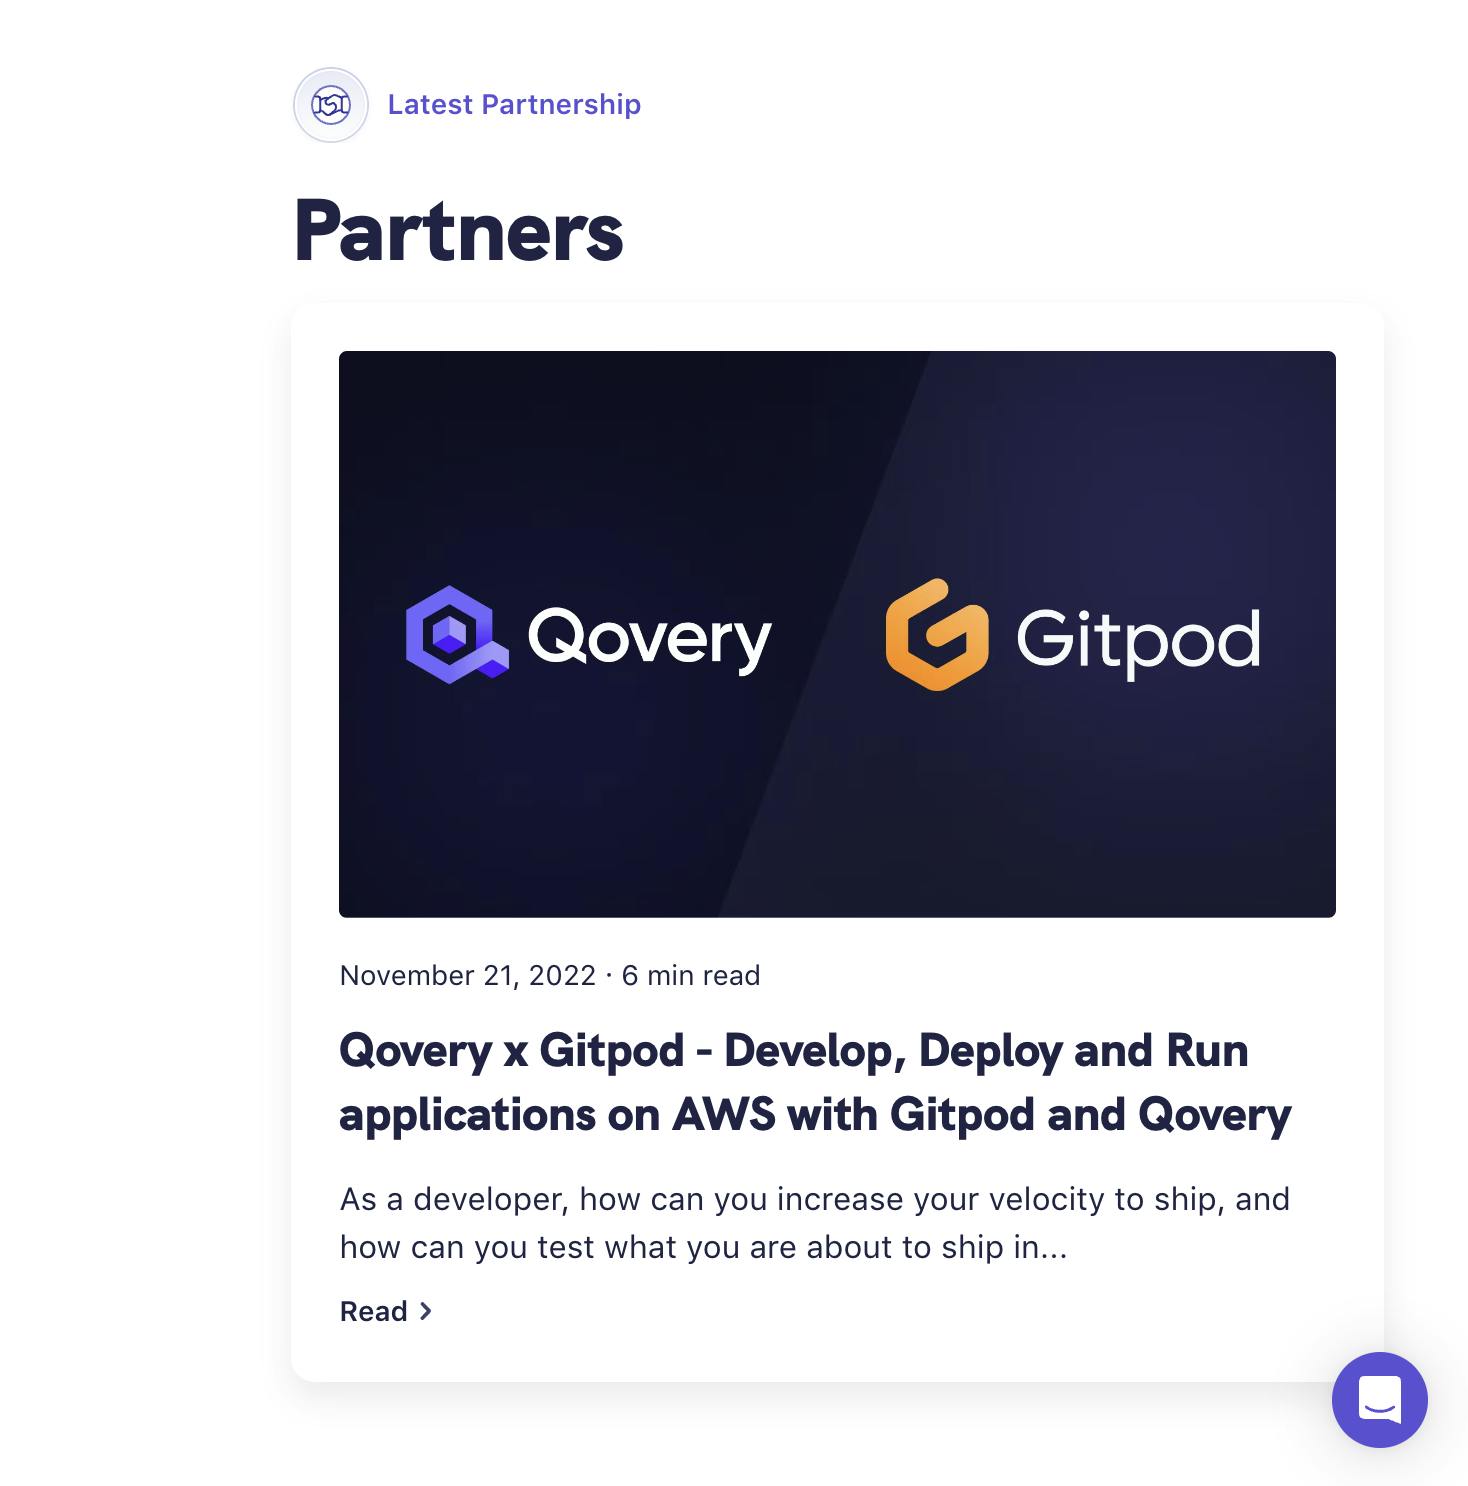 New View of Partnerships